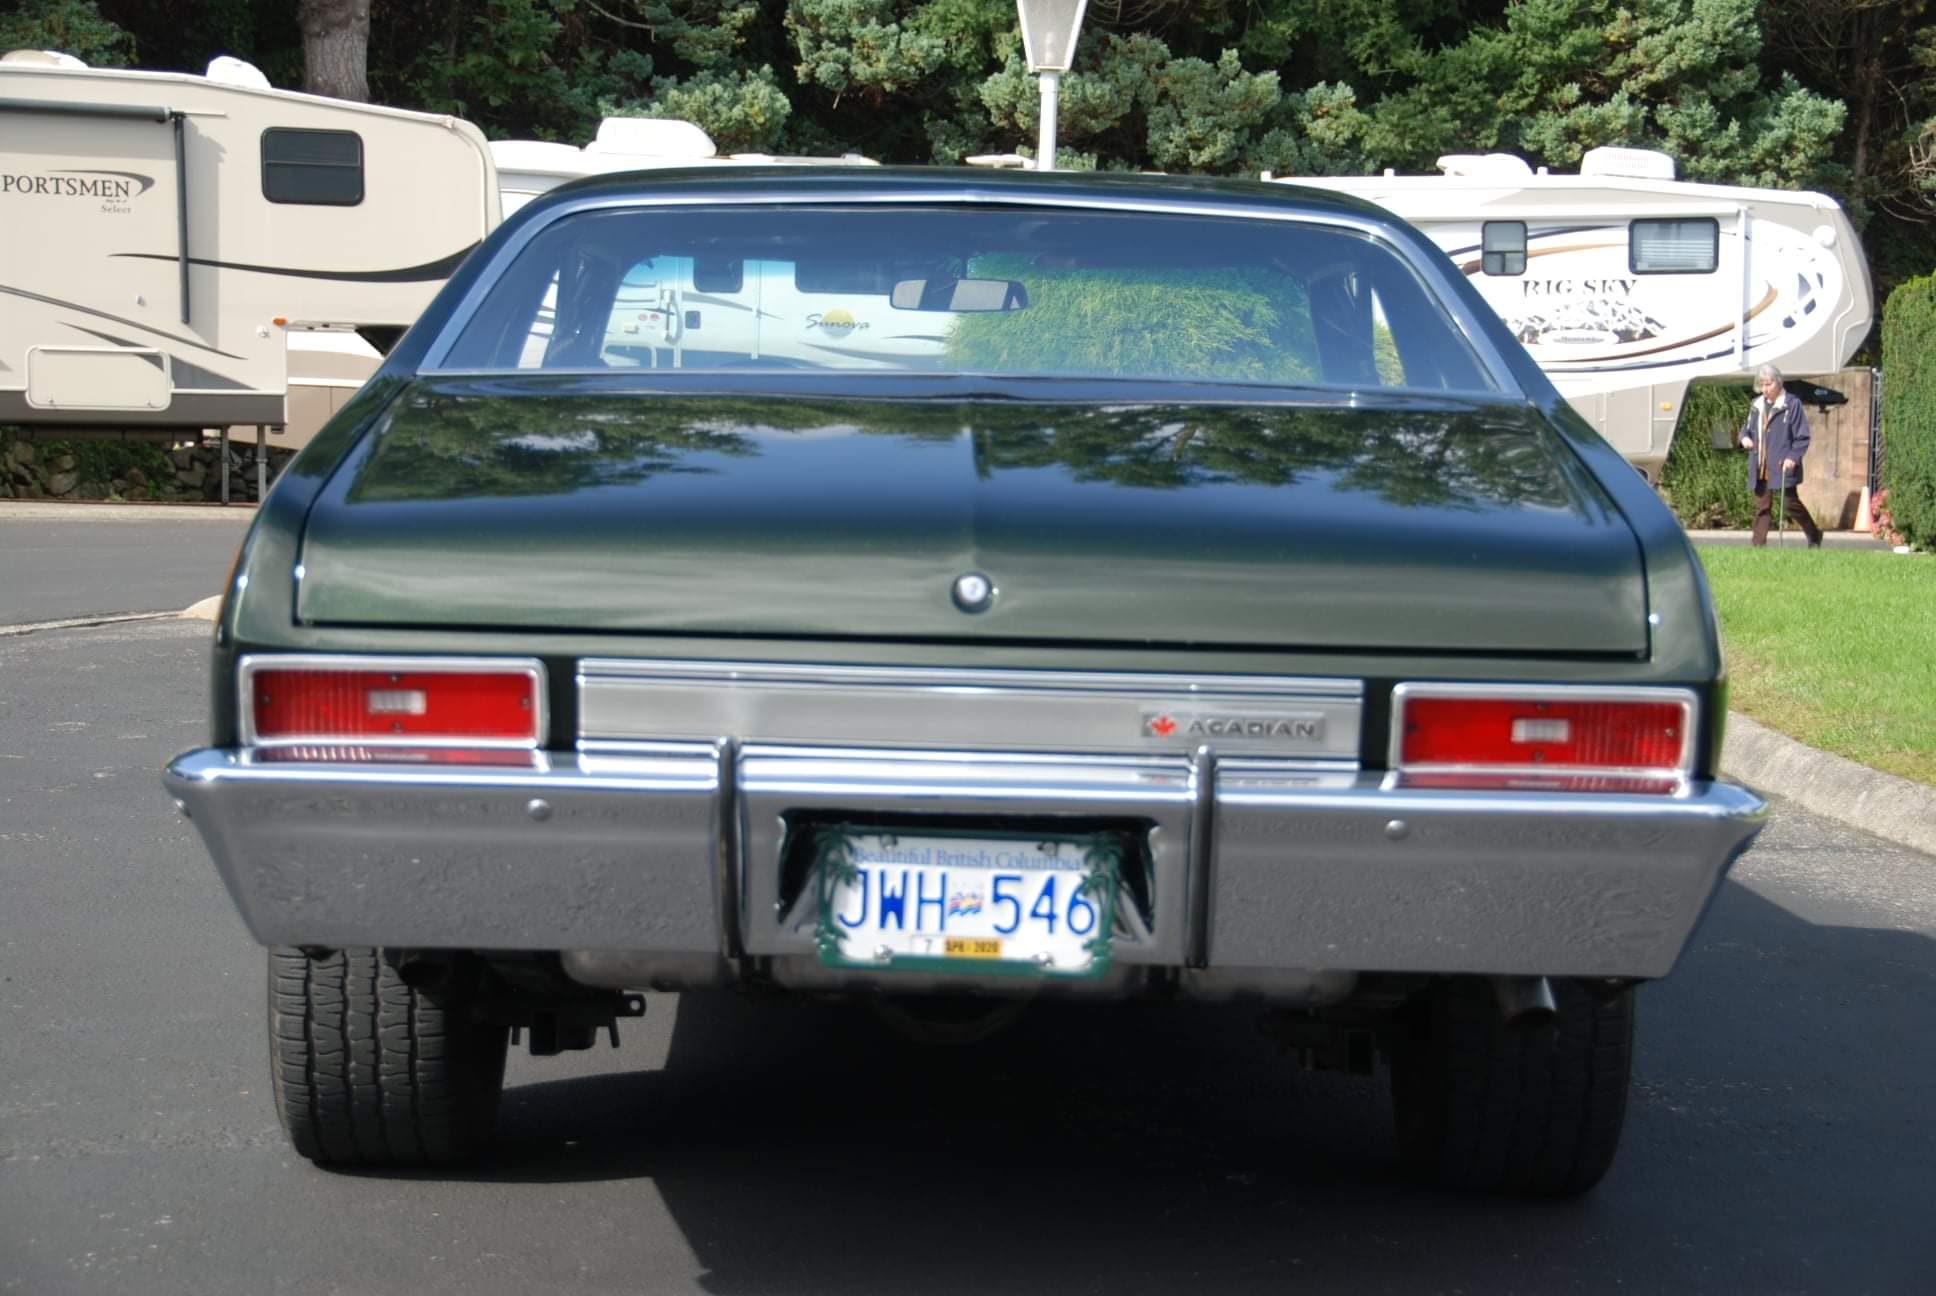 1970 Acadian SS